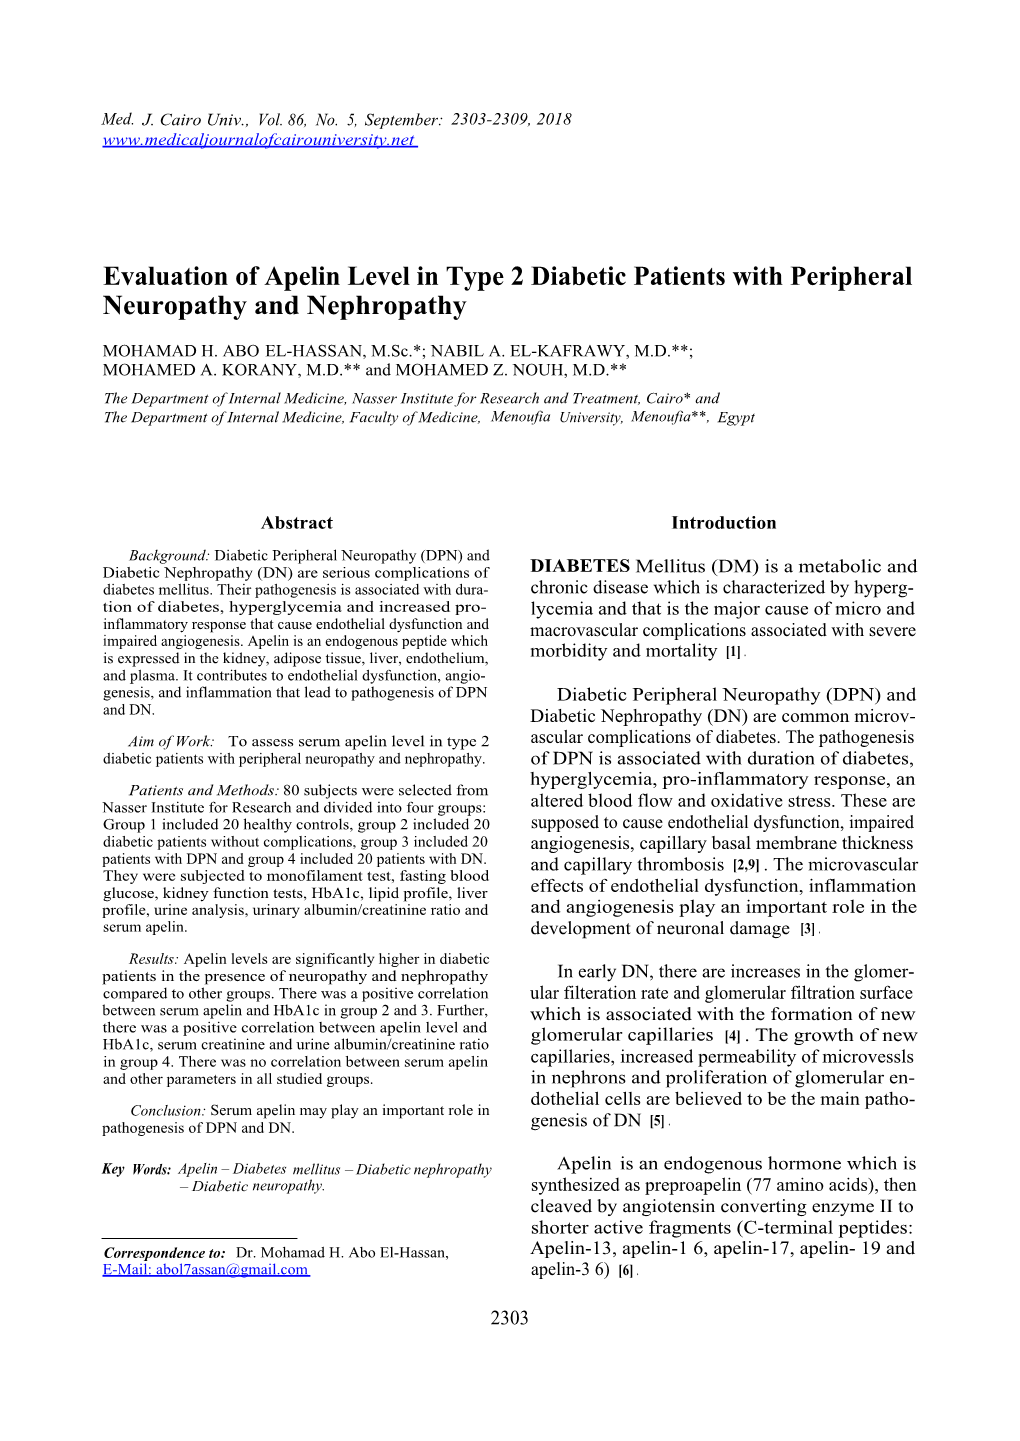 Evaluation of Apelin Level in Type 2 Diabetic Patients with Peripheral